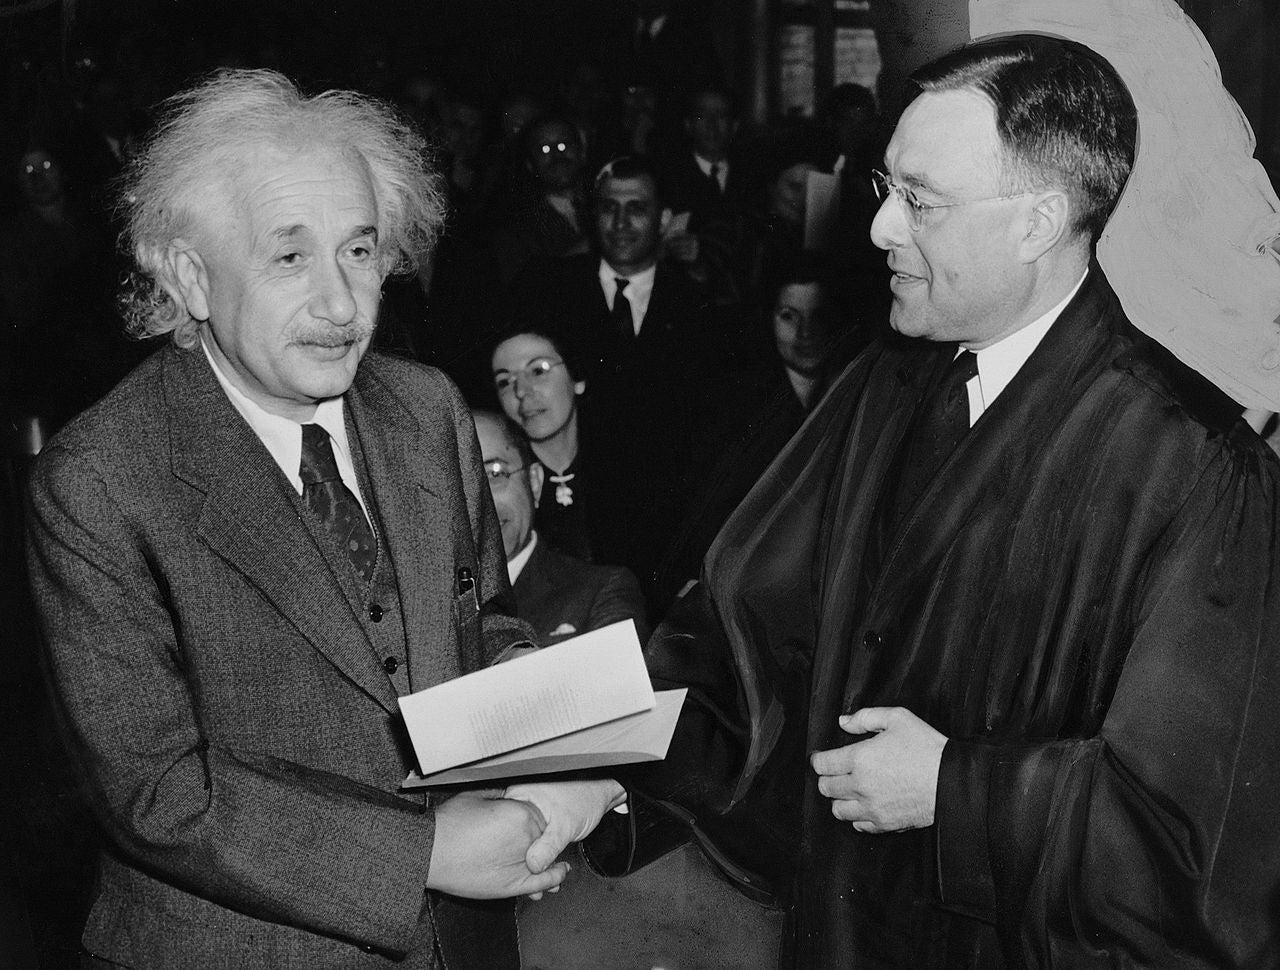 what was albert einsteins involvement in the making of the atom bomb during world war two